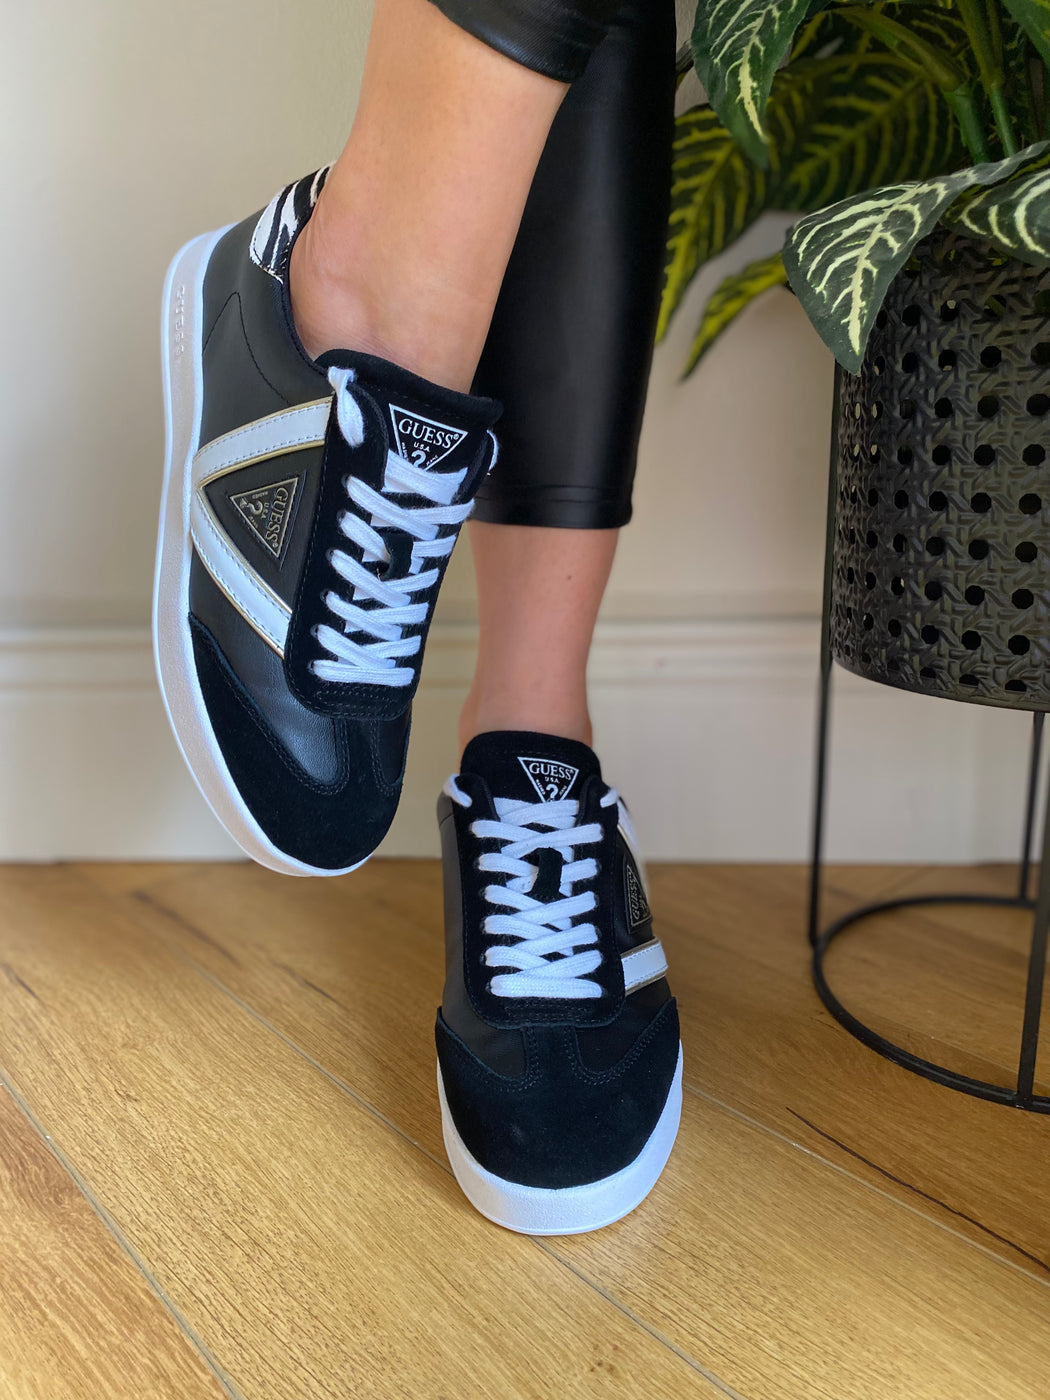 Guess Black white Sole Trainer With Zebra print insert